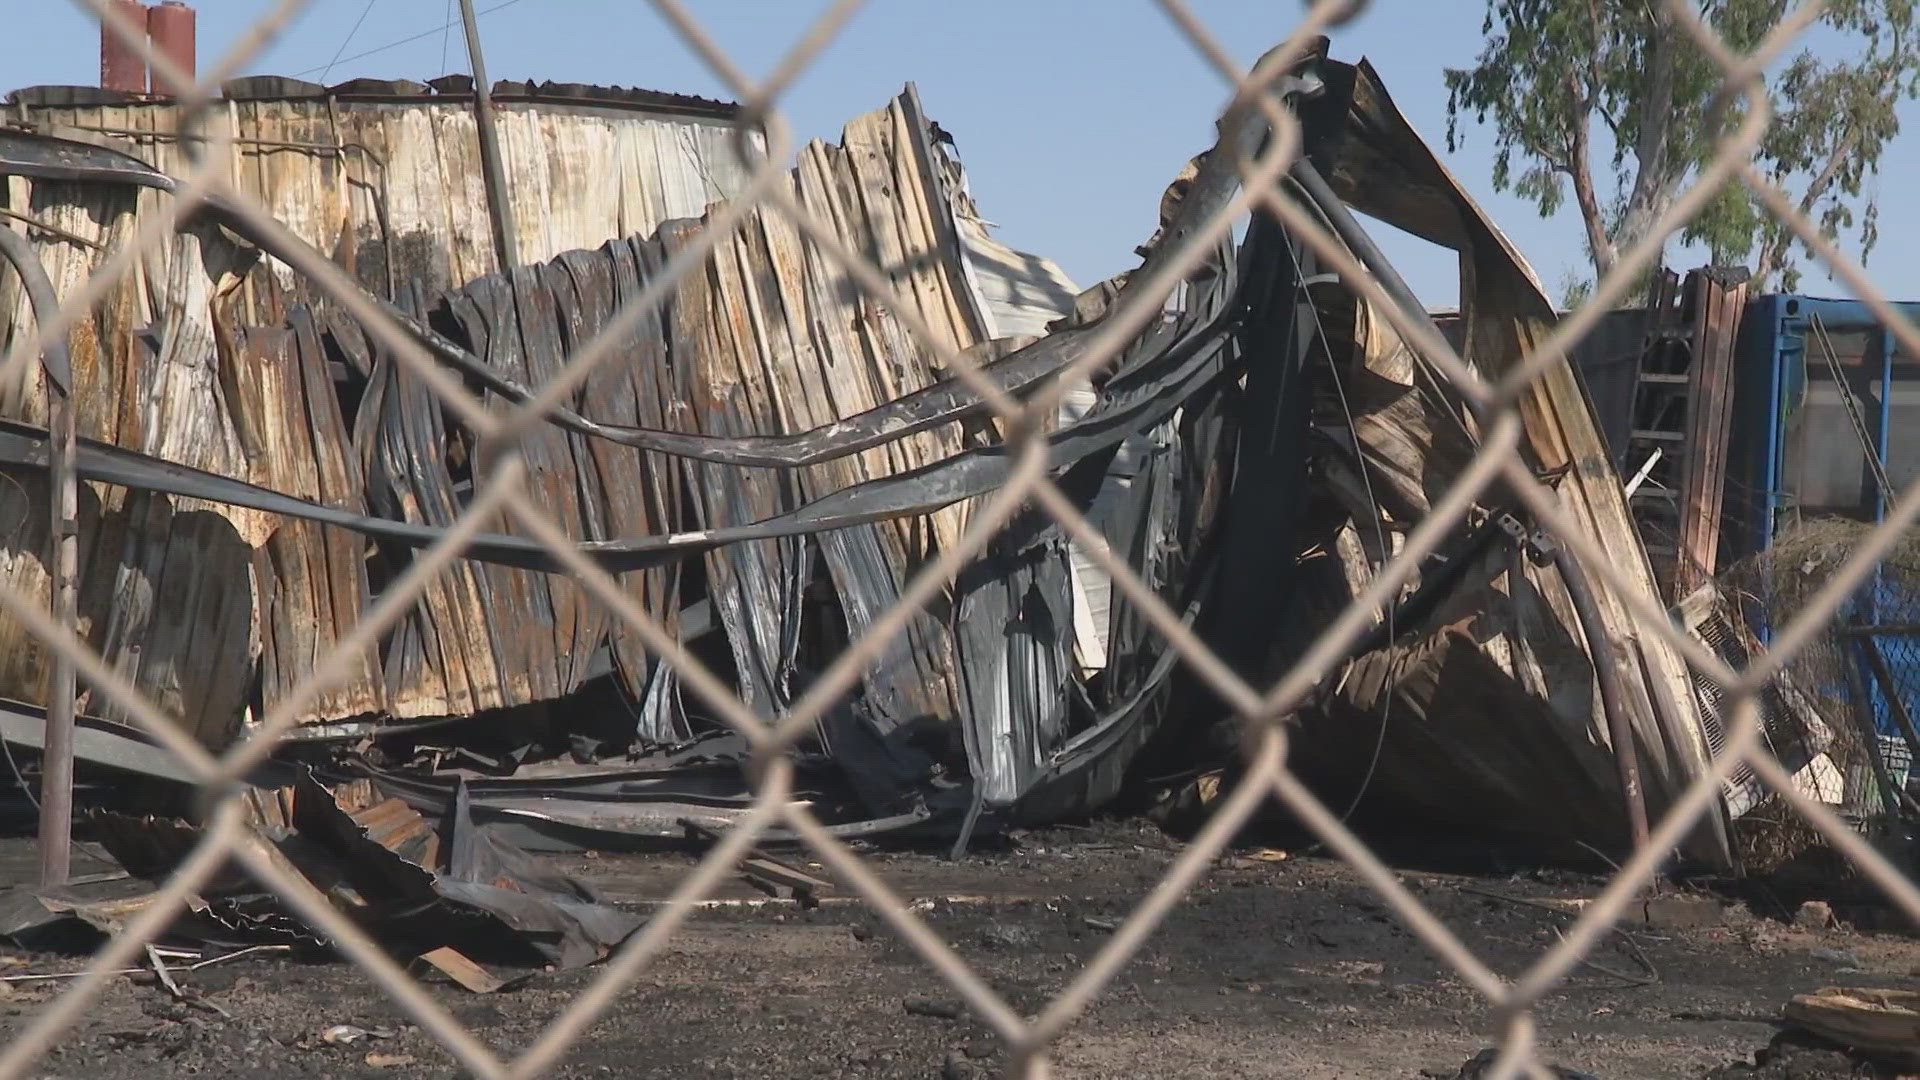 The deadly fire was reported on the night of April 27 near 59th Avenue and Buckeye Road.